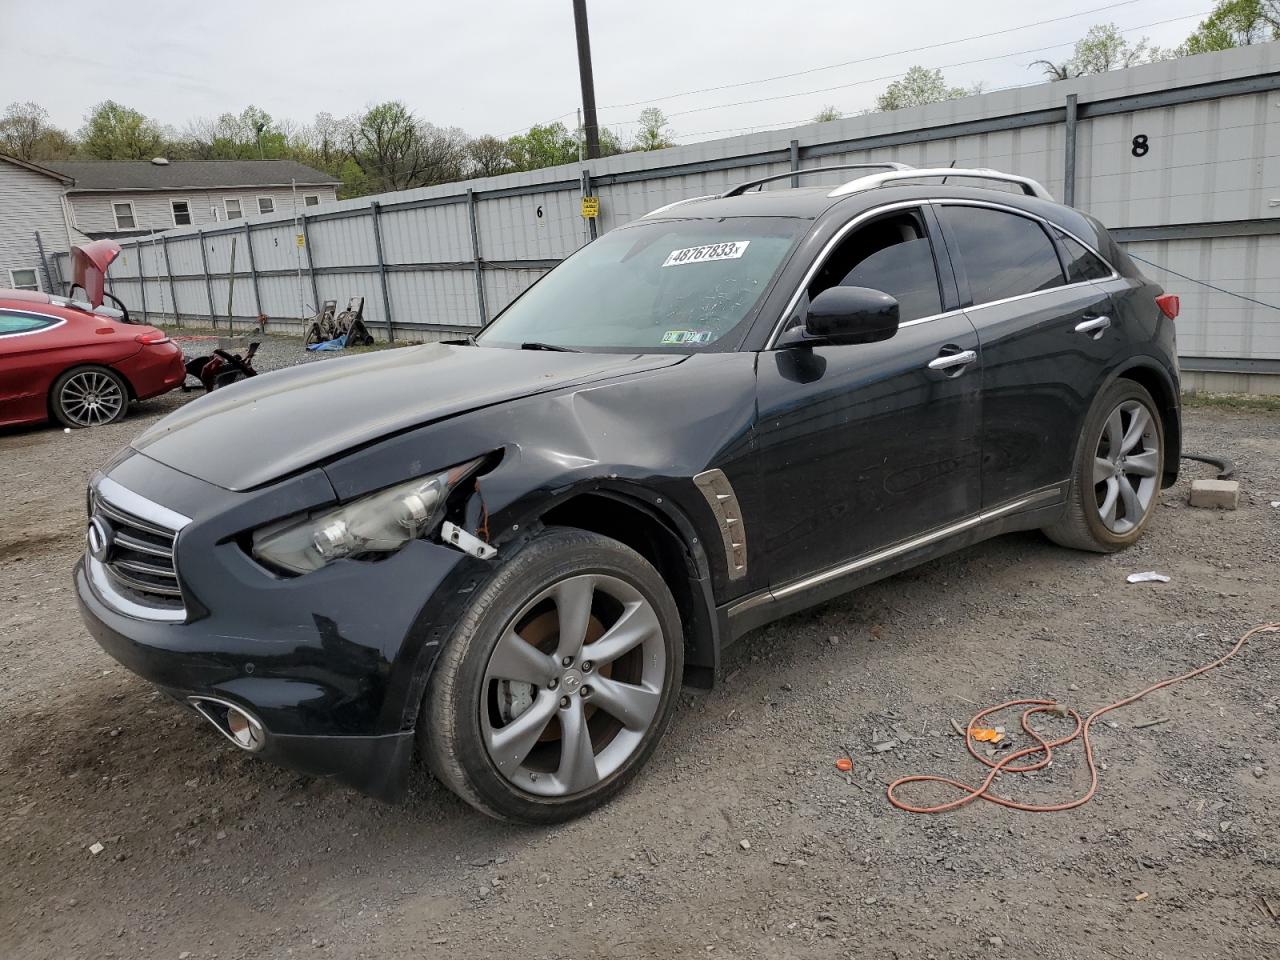 2013 Infiniti FX50 for sale at Copart York Haven, PA Lot #48767*** |  SalvageReseller.com